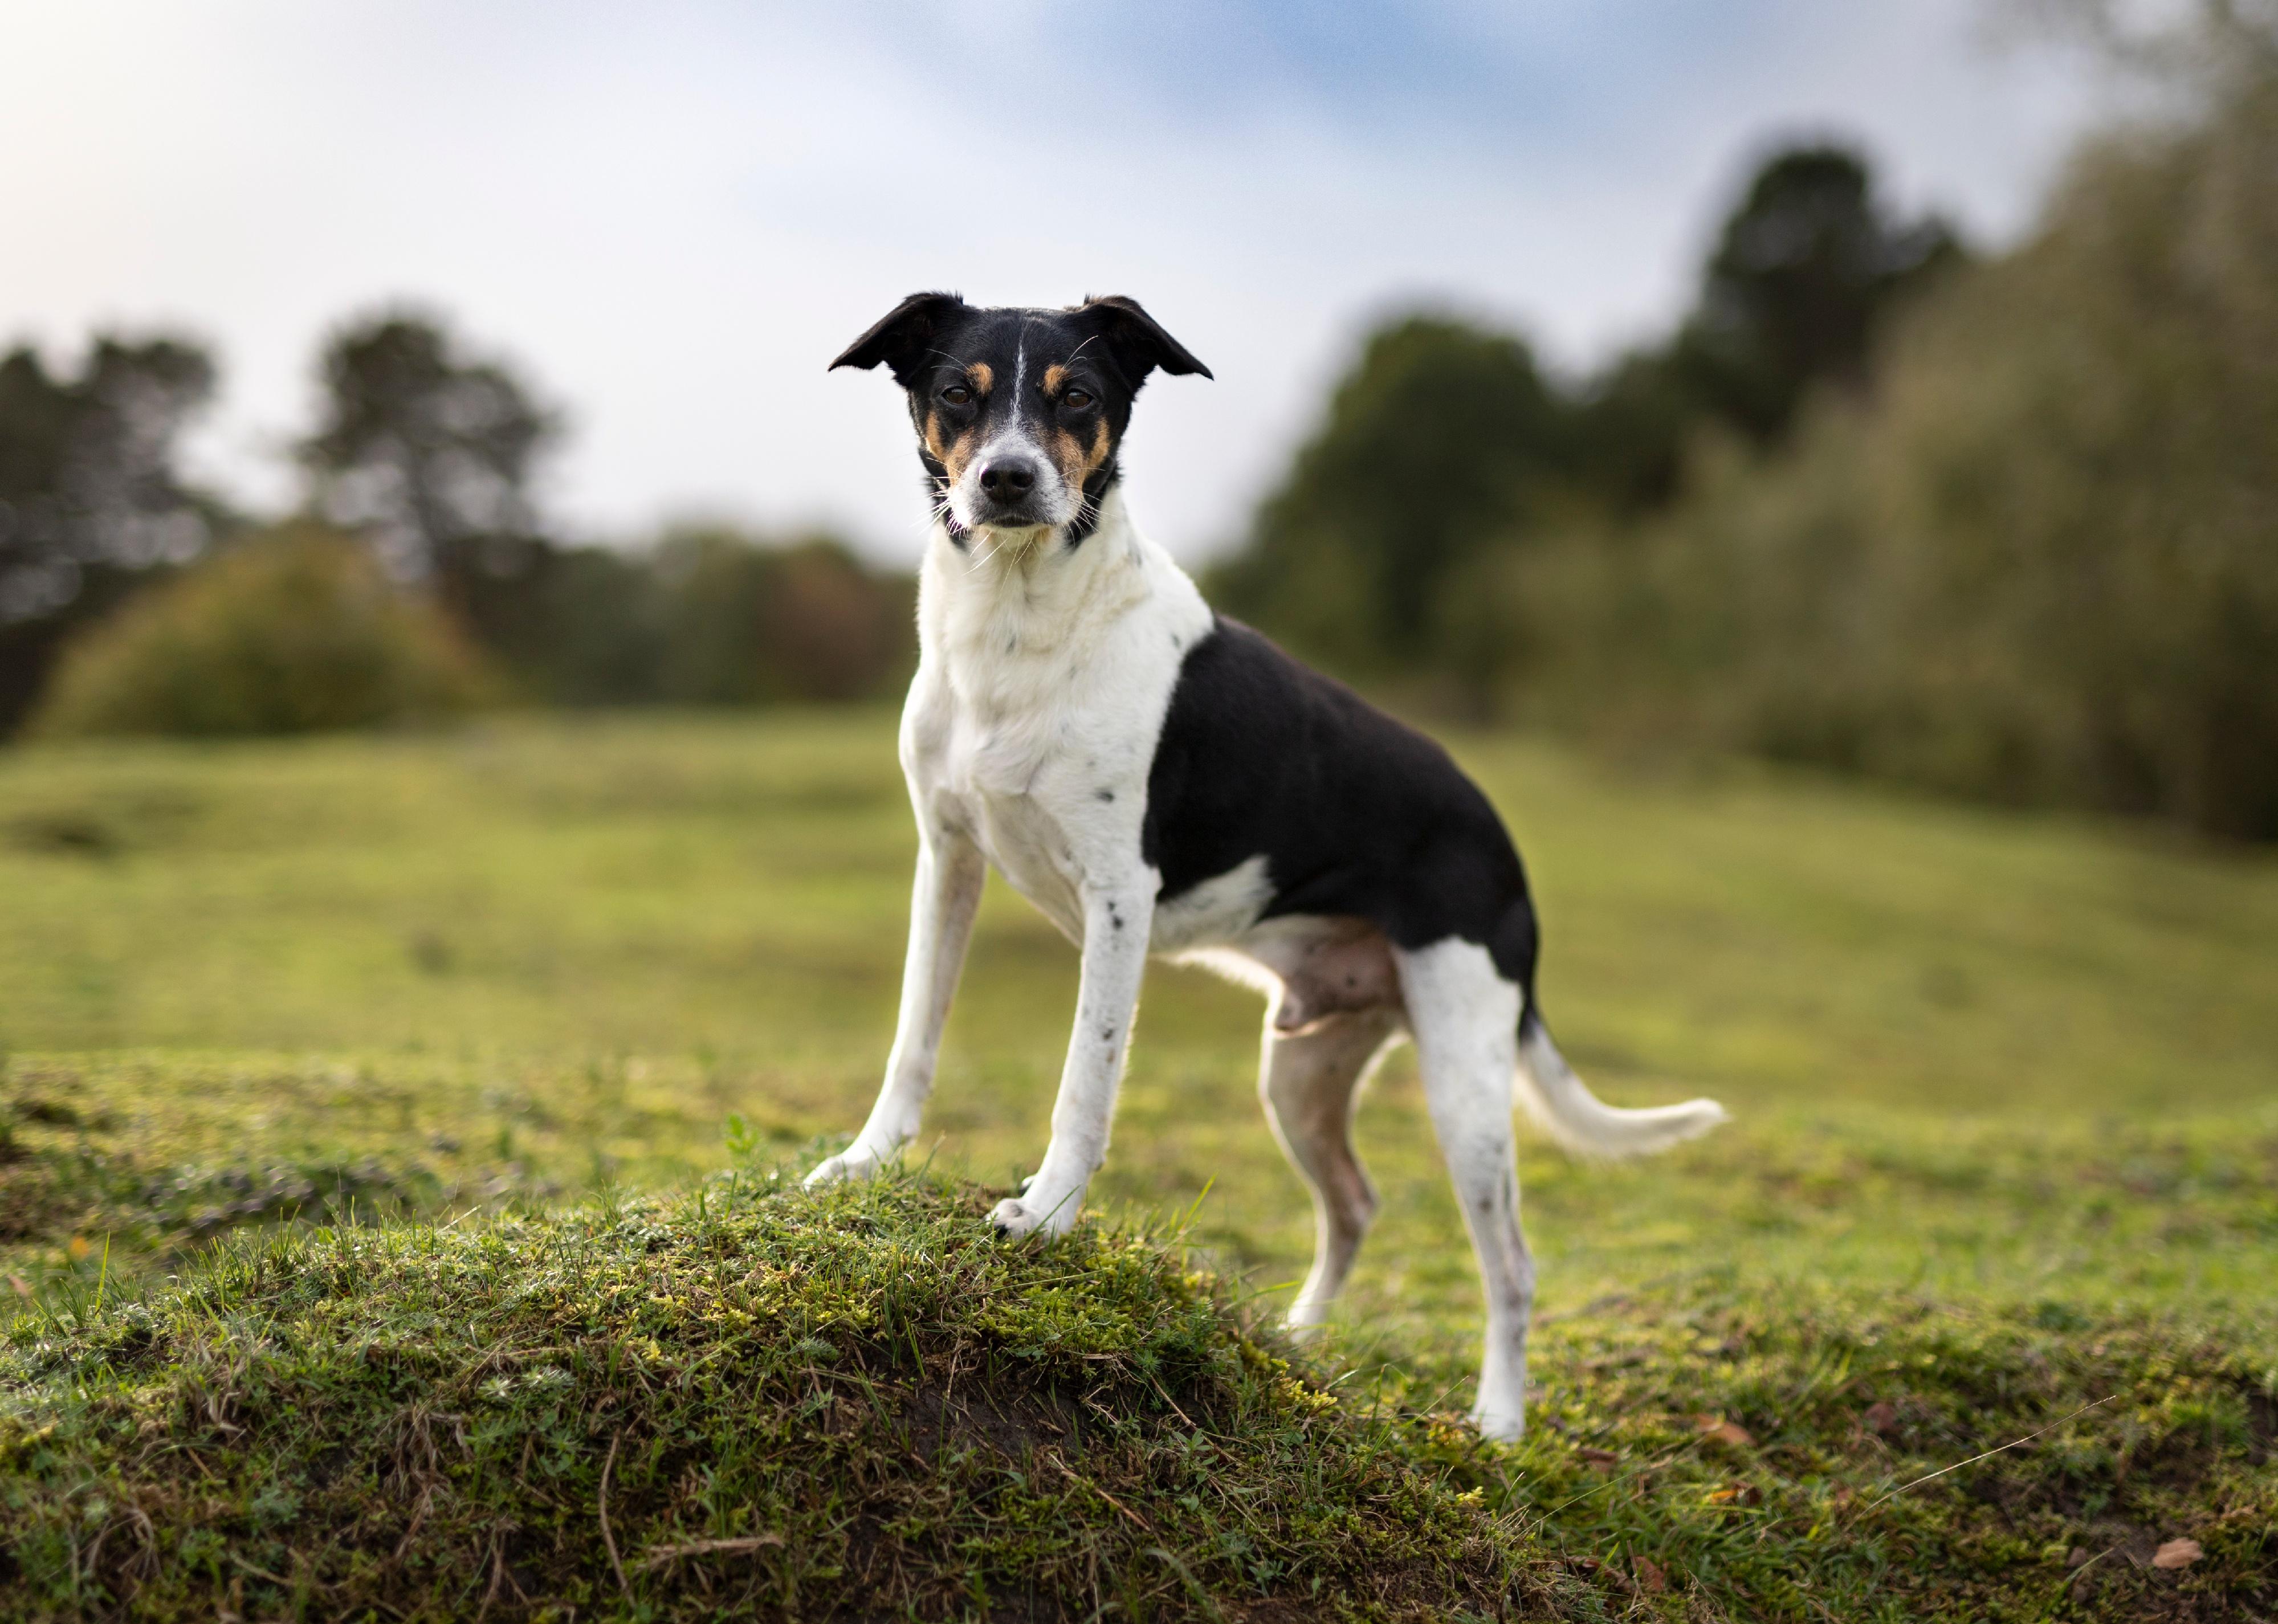 A rat terrier standing in the middle of the grass with trees on background.